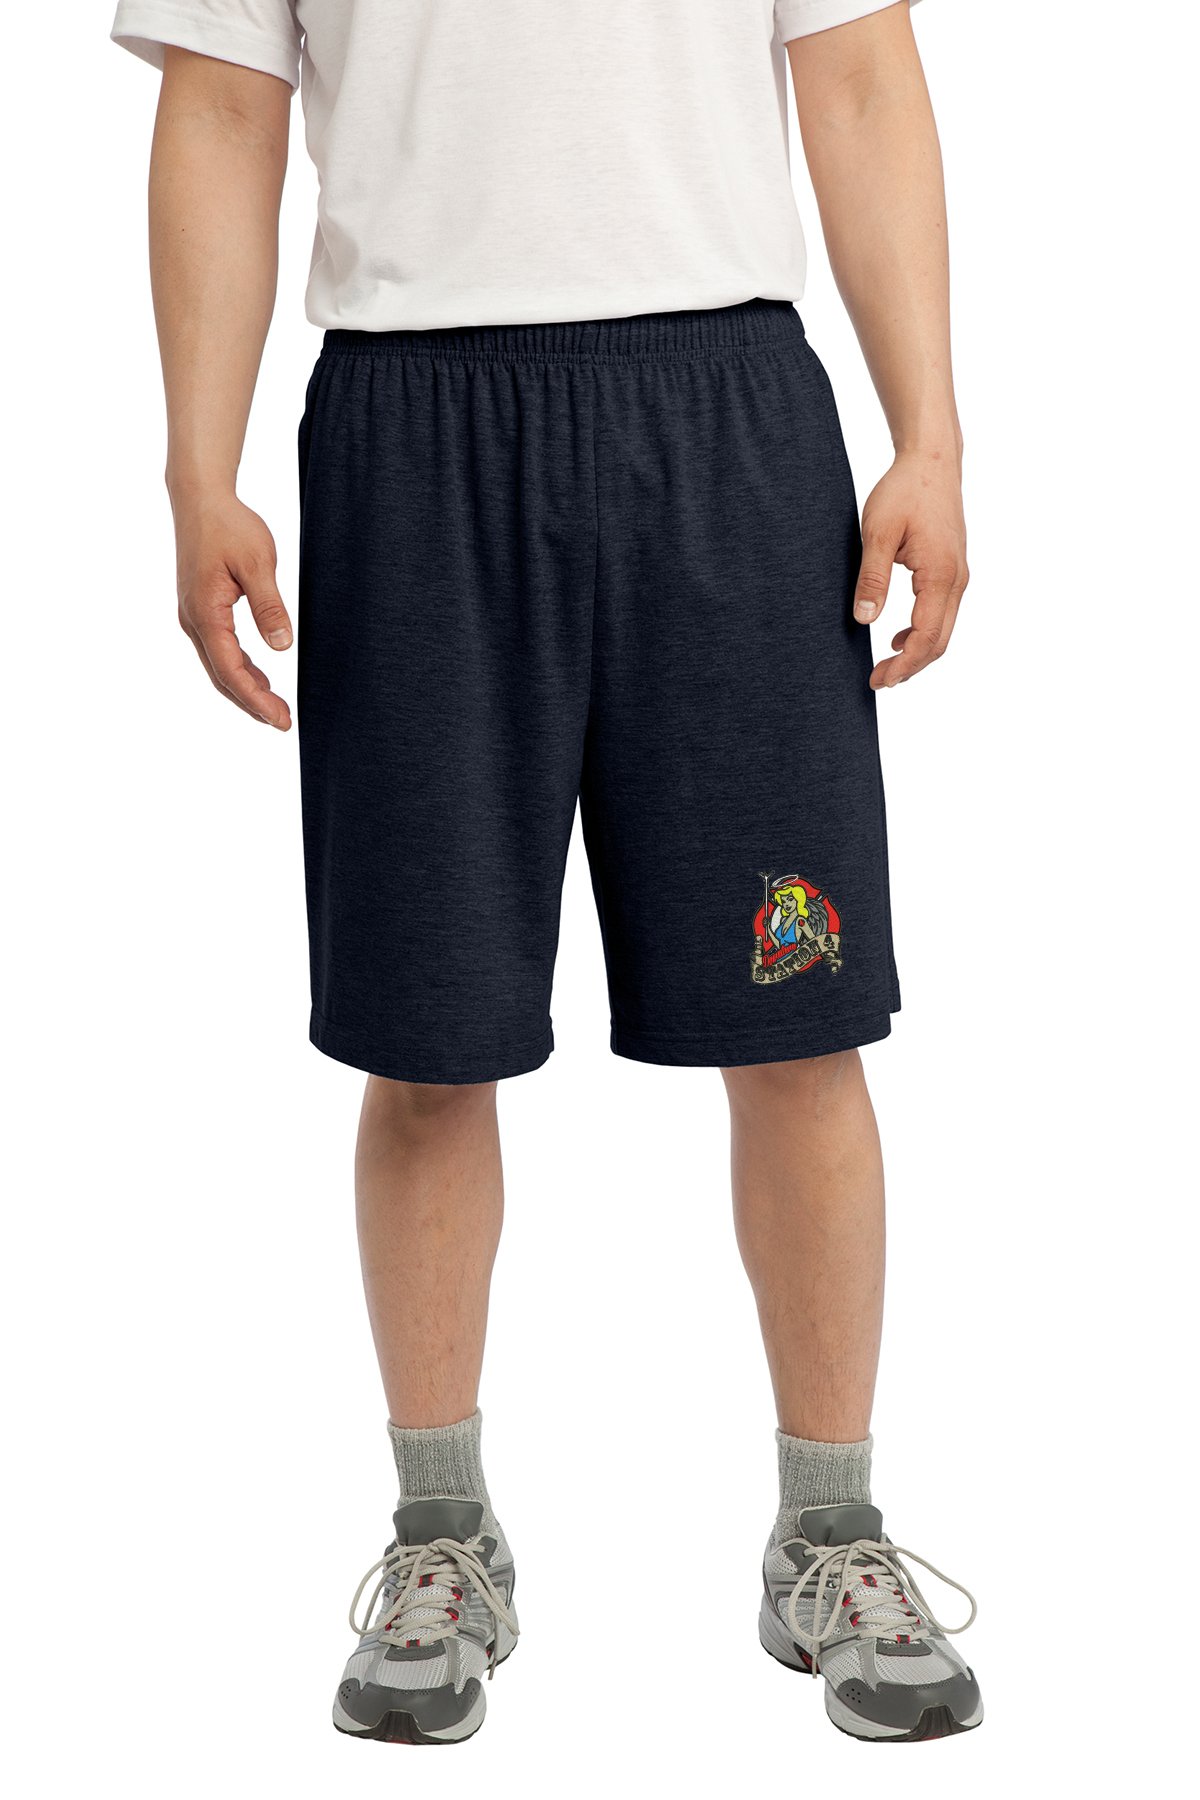 STATION FOUR WORKOUT SHORTS